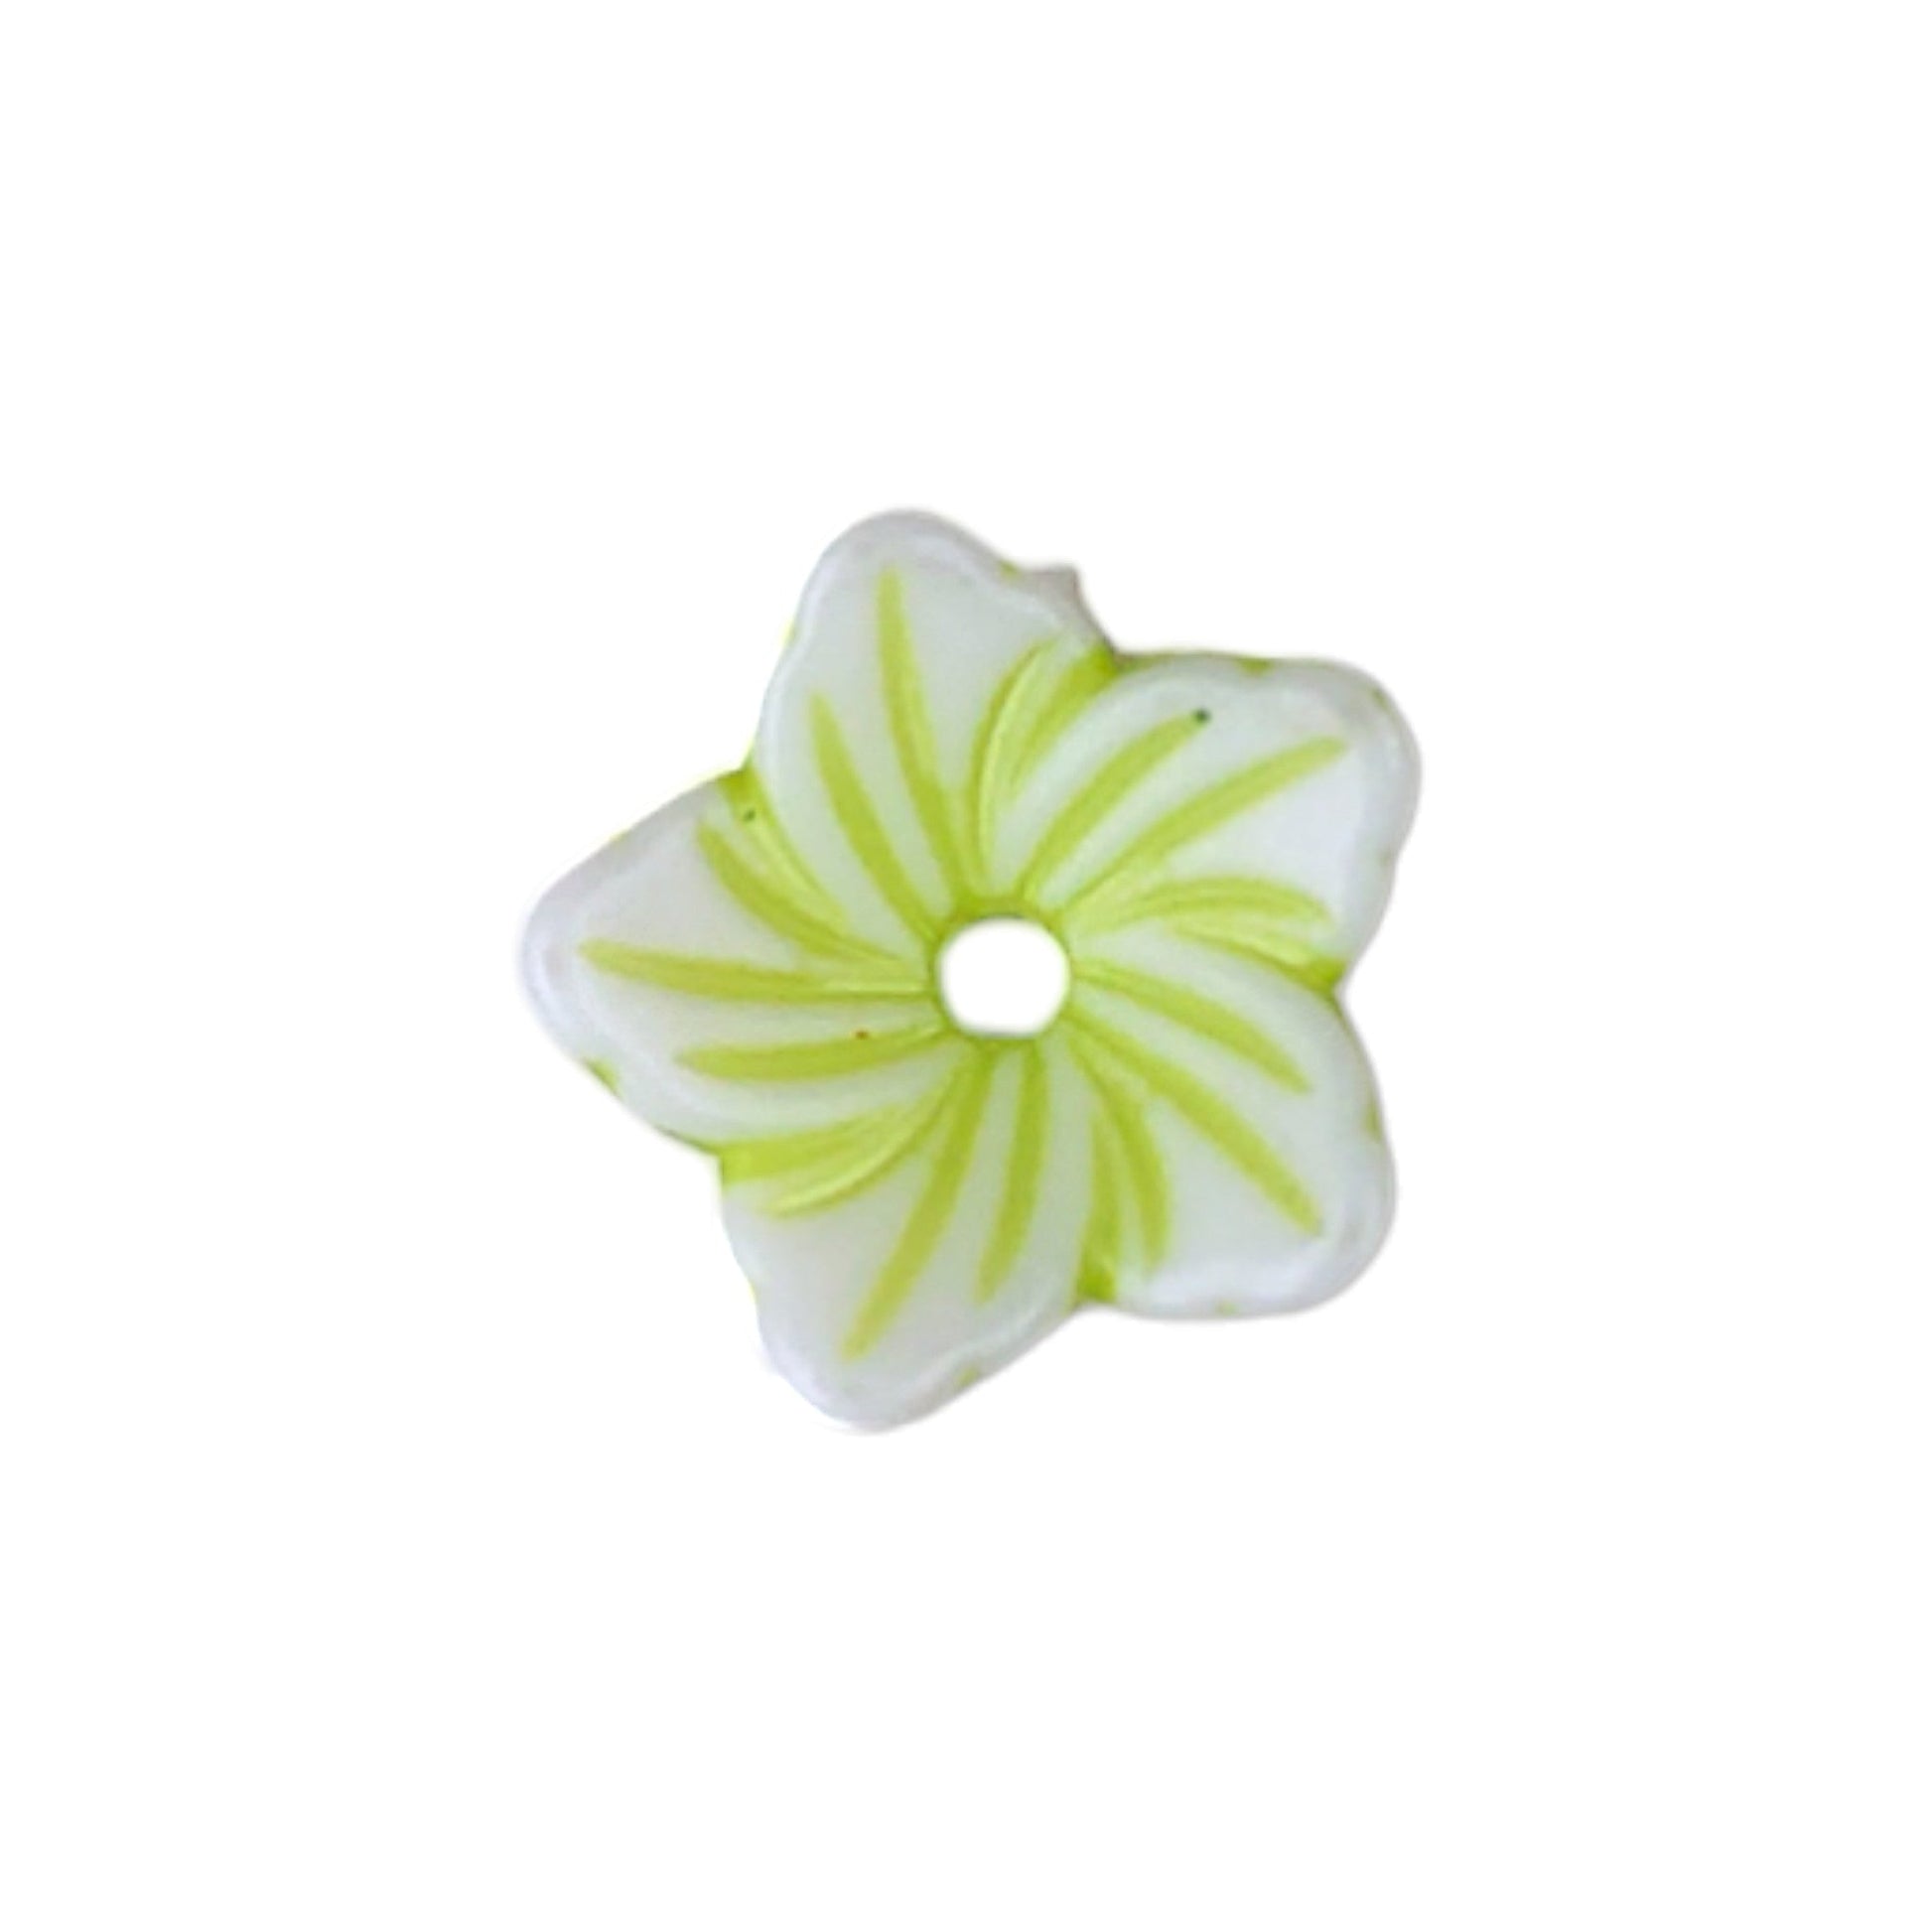 Indian Petals 12mm Small Acrylic Pastel Color Flower For Craft Or Decoration